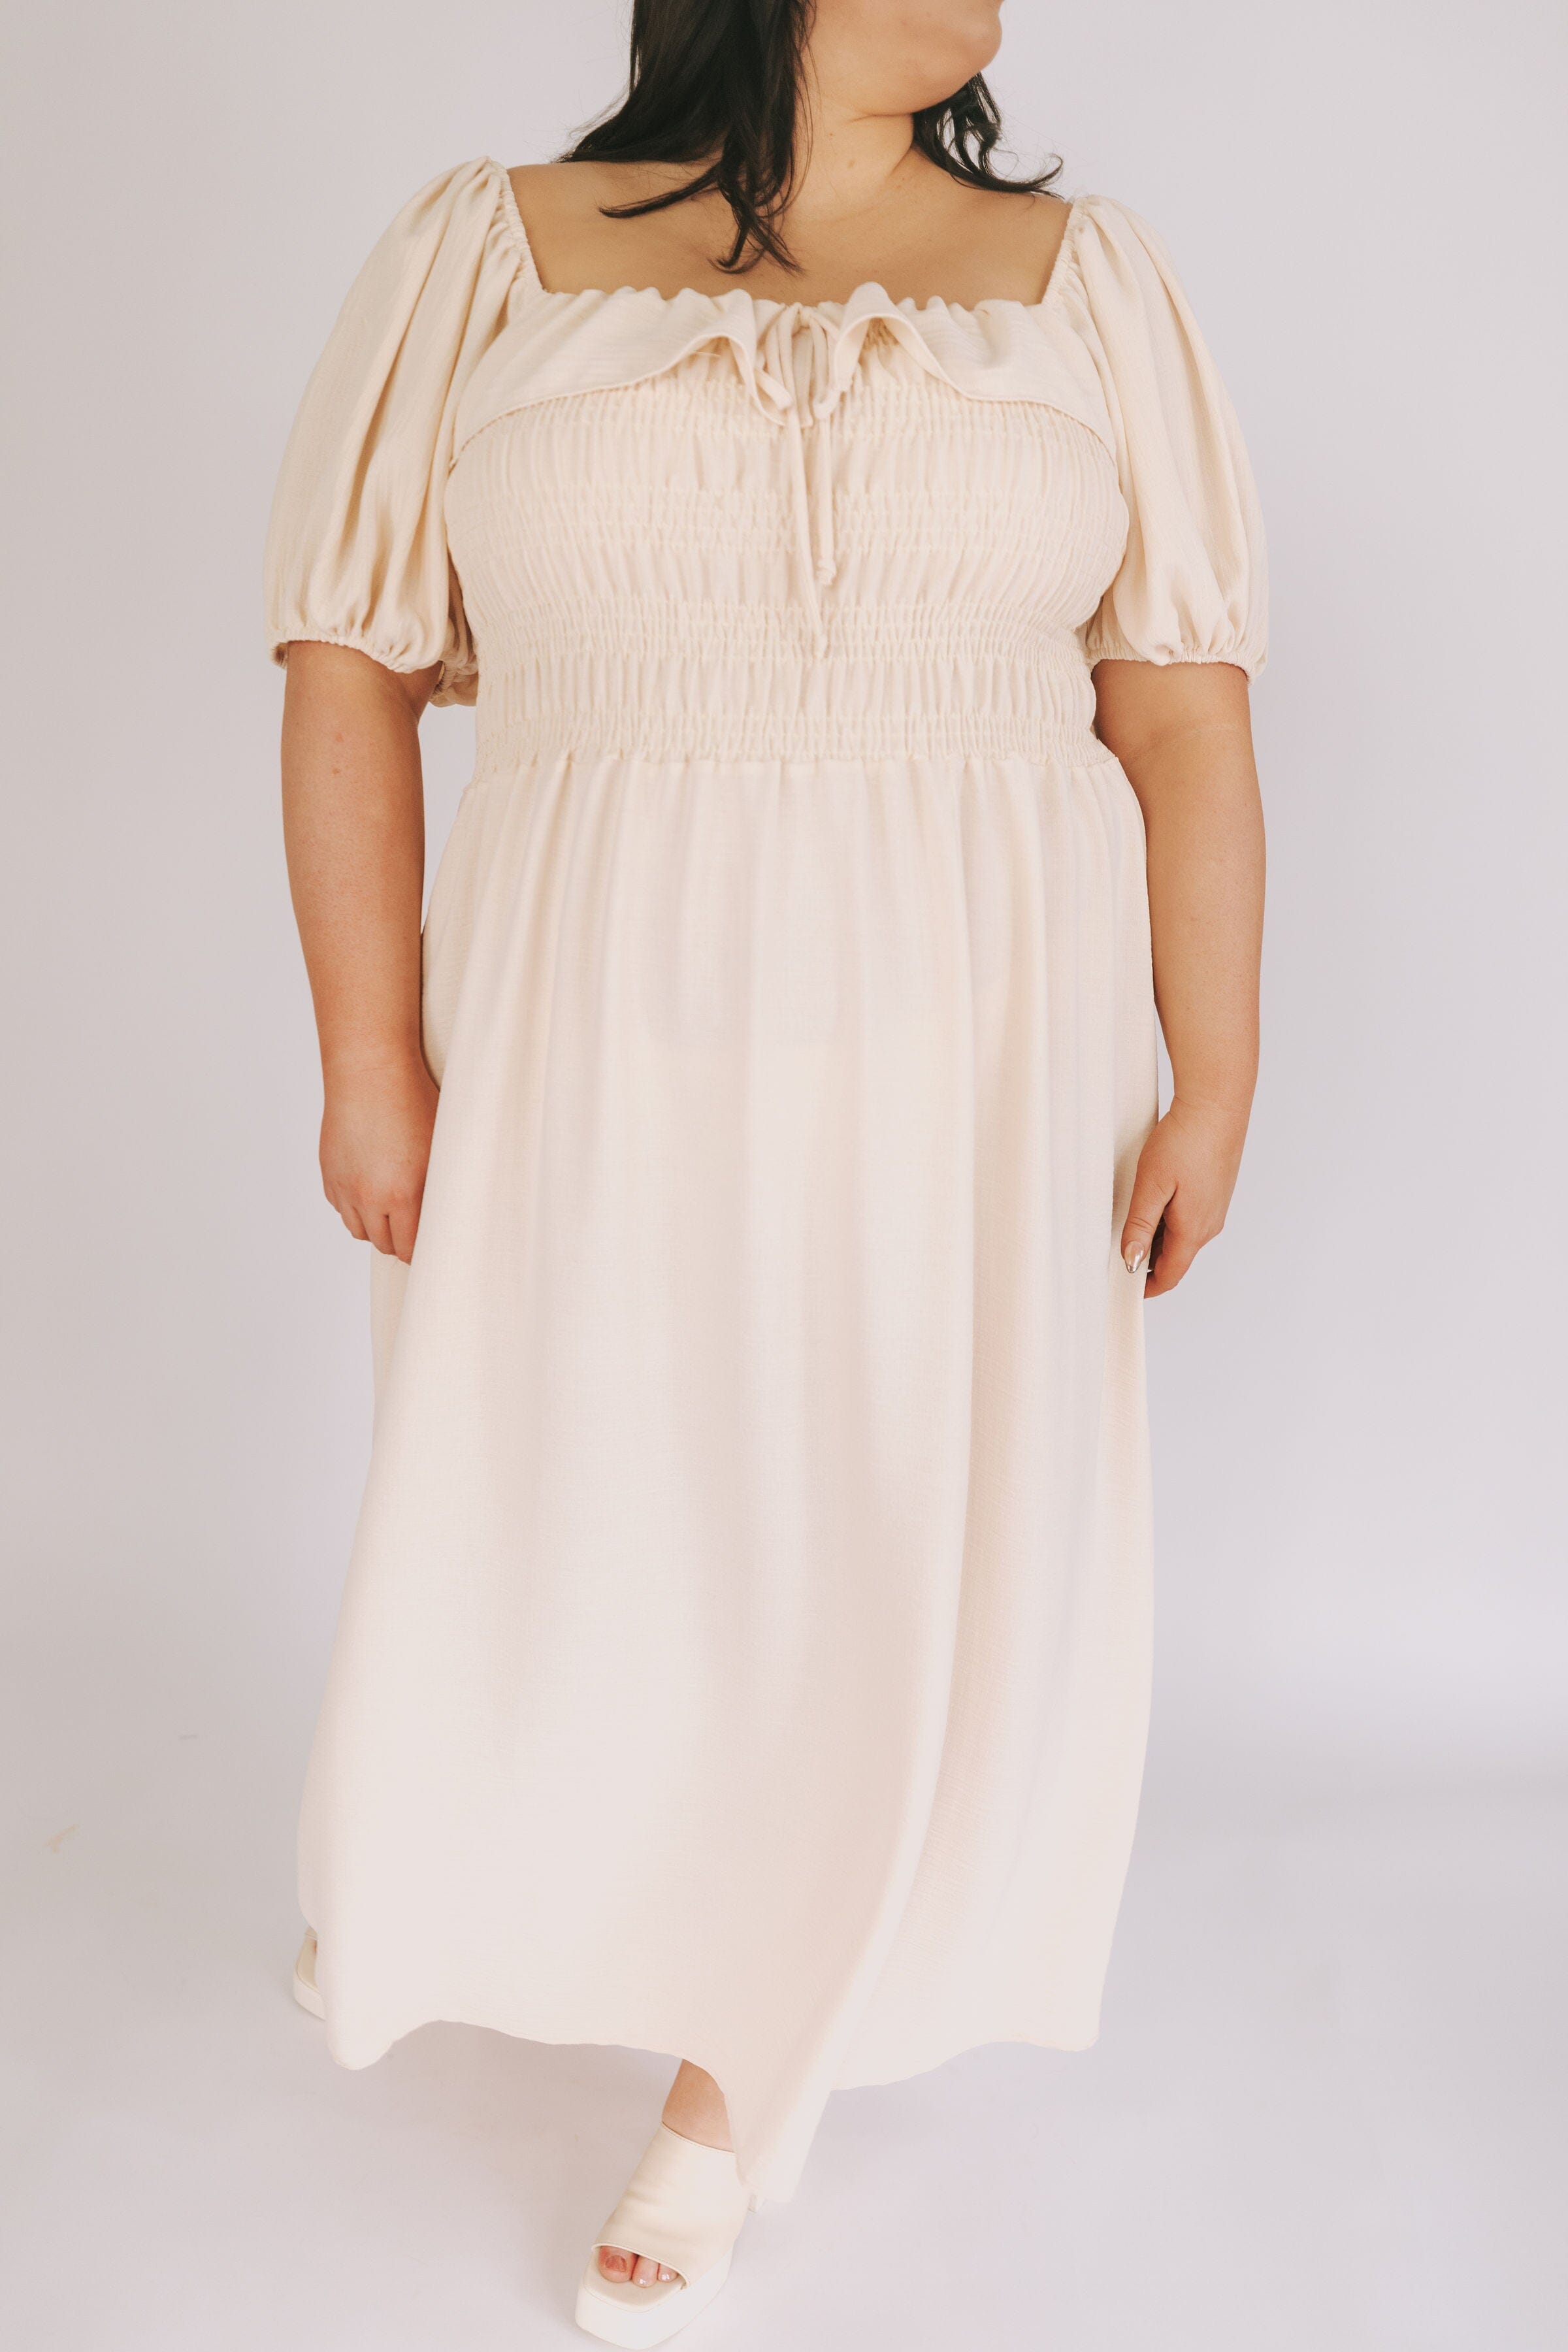 PLUS SIZE - Can't Leave You Dress - 2 Colors!